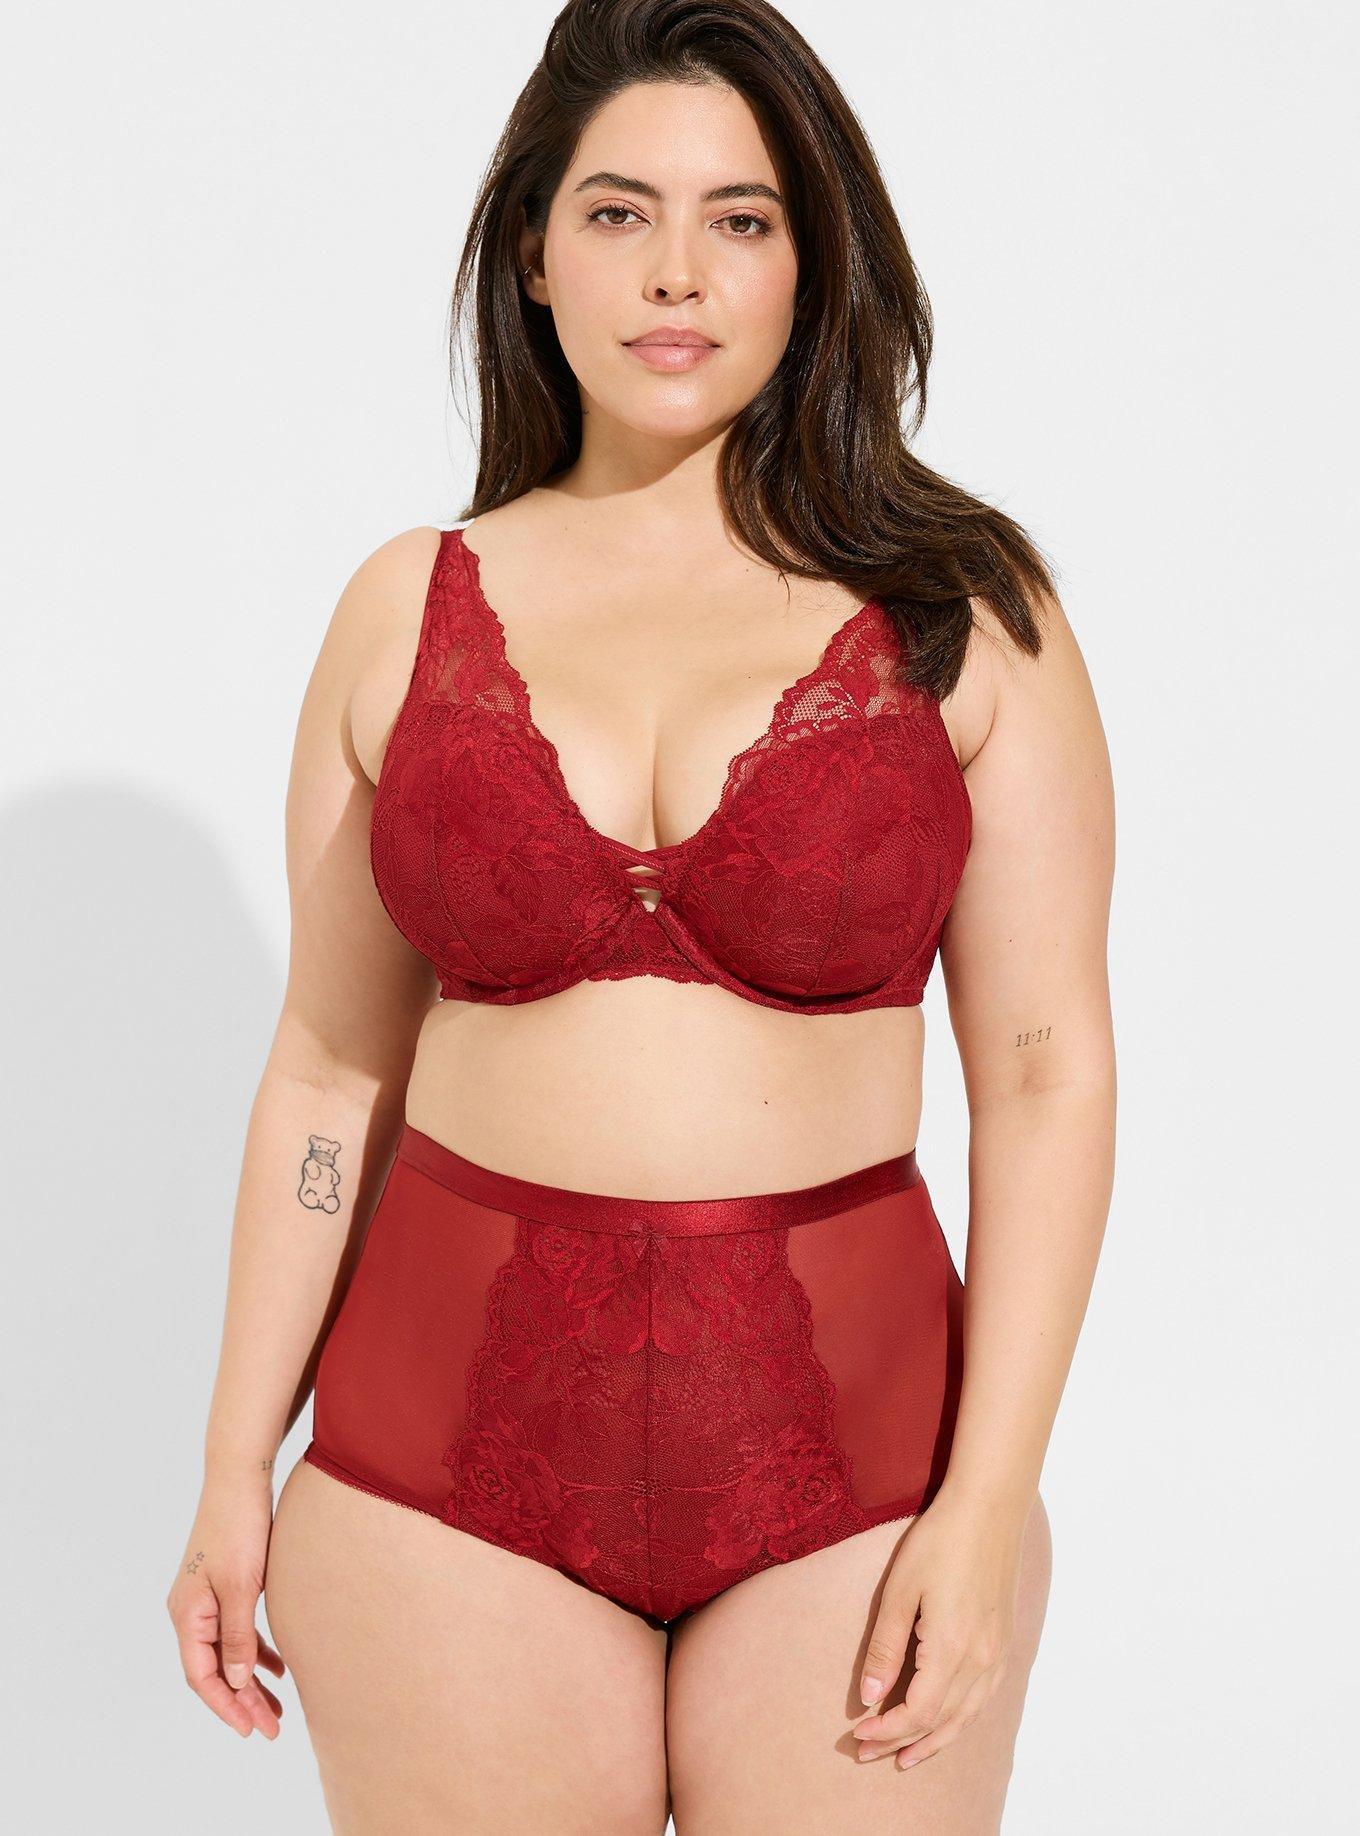 Lane Bryant Cacique Red Boost Balconette Bra 46DDD Lace Up Push Up